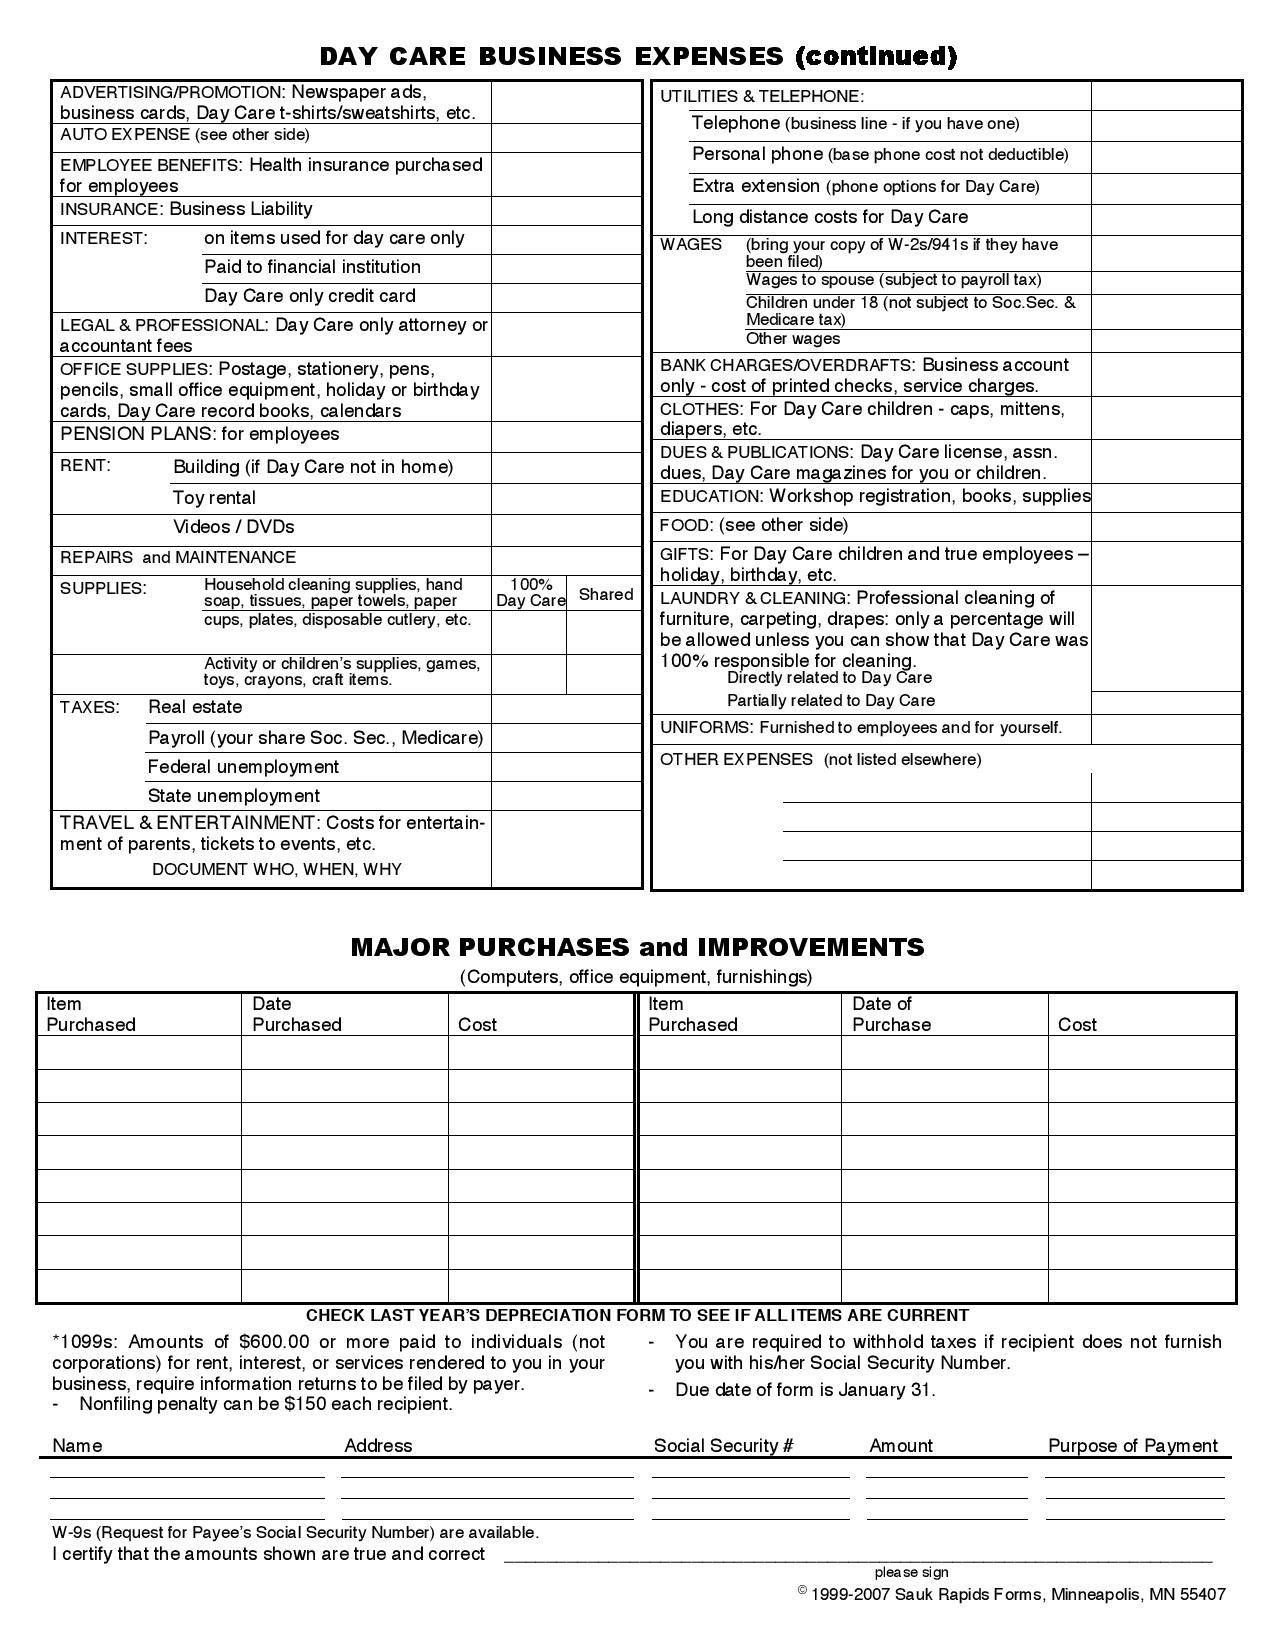 Home Daycare Tax Worksheet Daycare Business In E and Expense Sheet to File Your